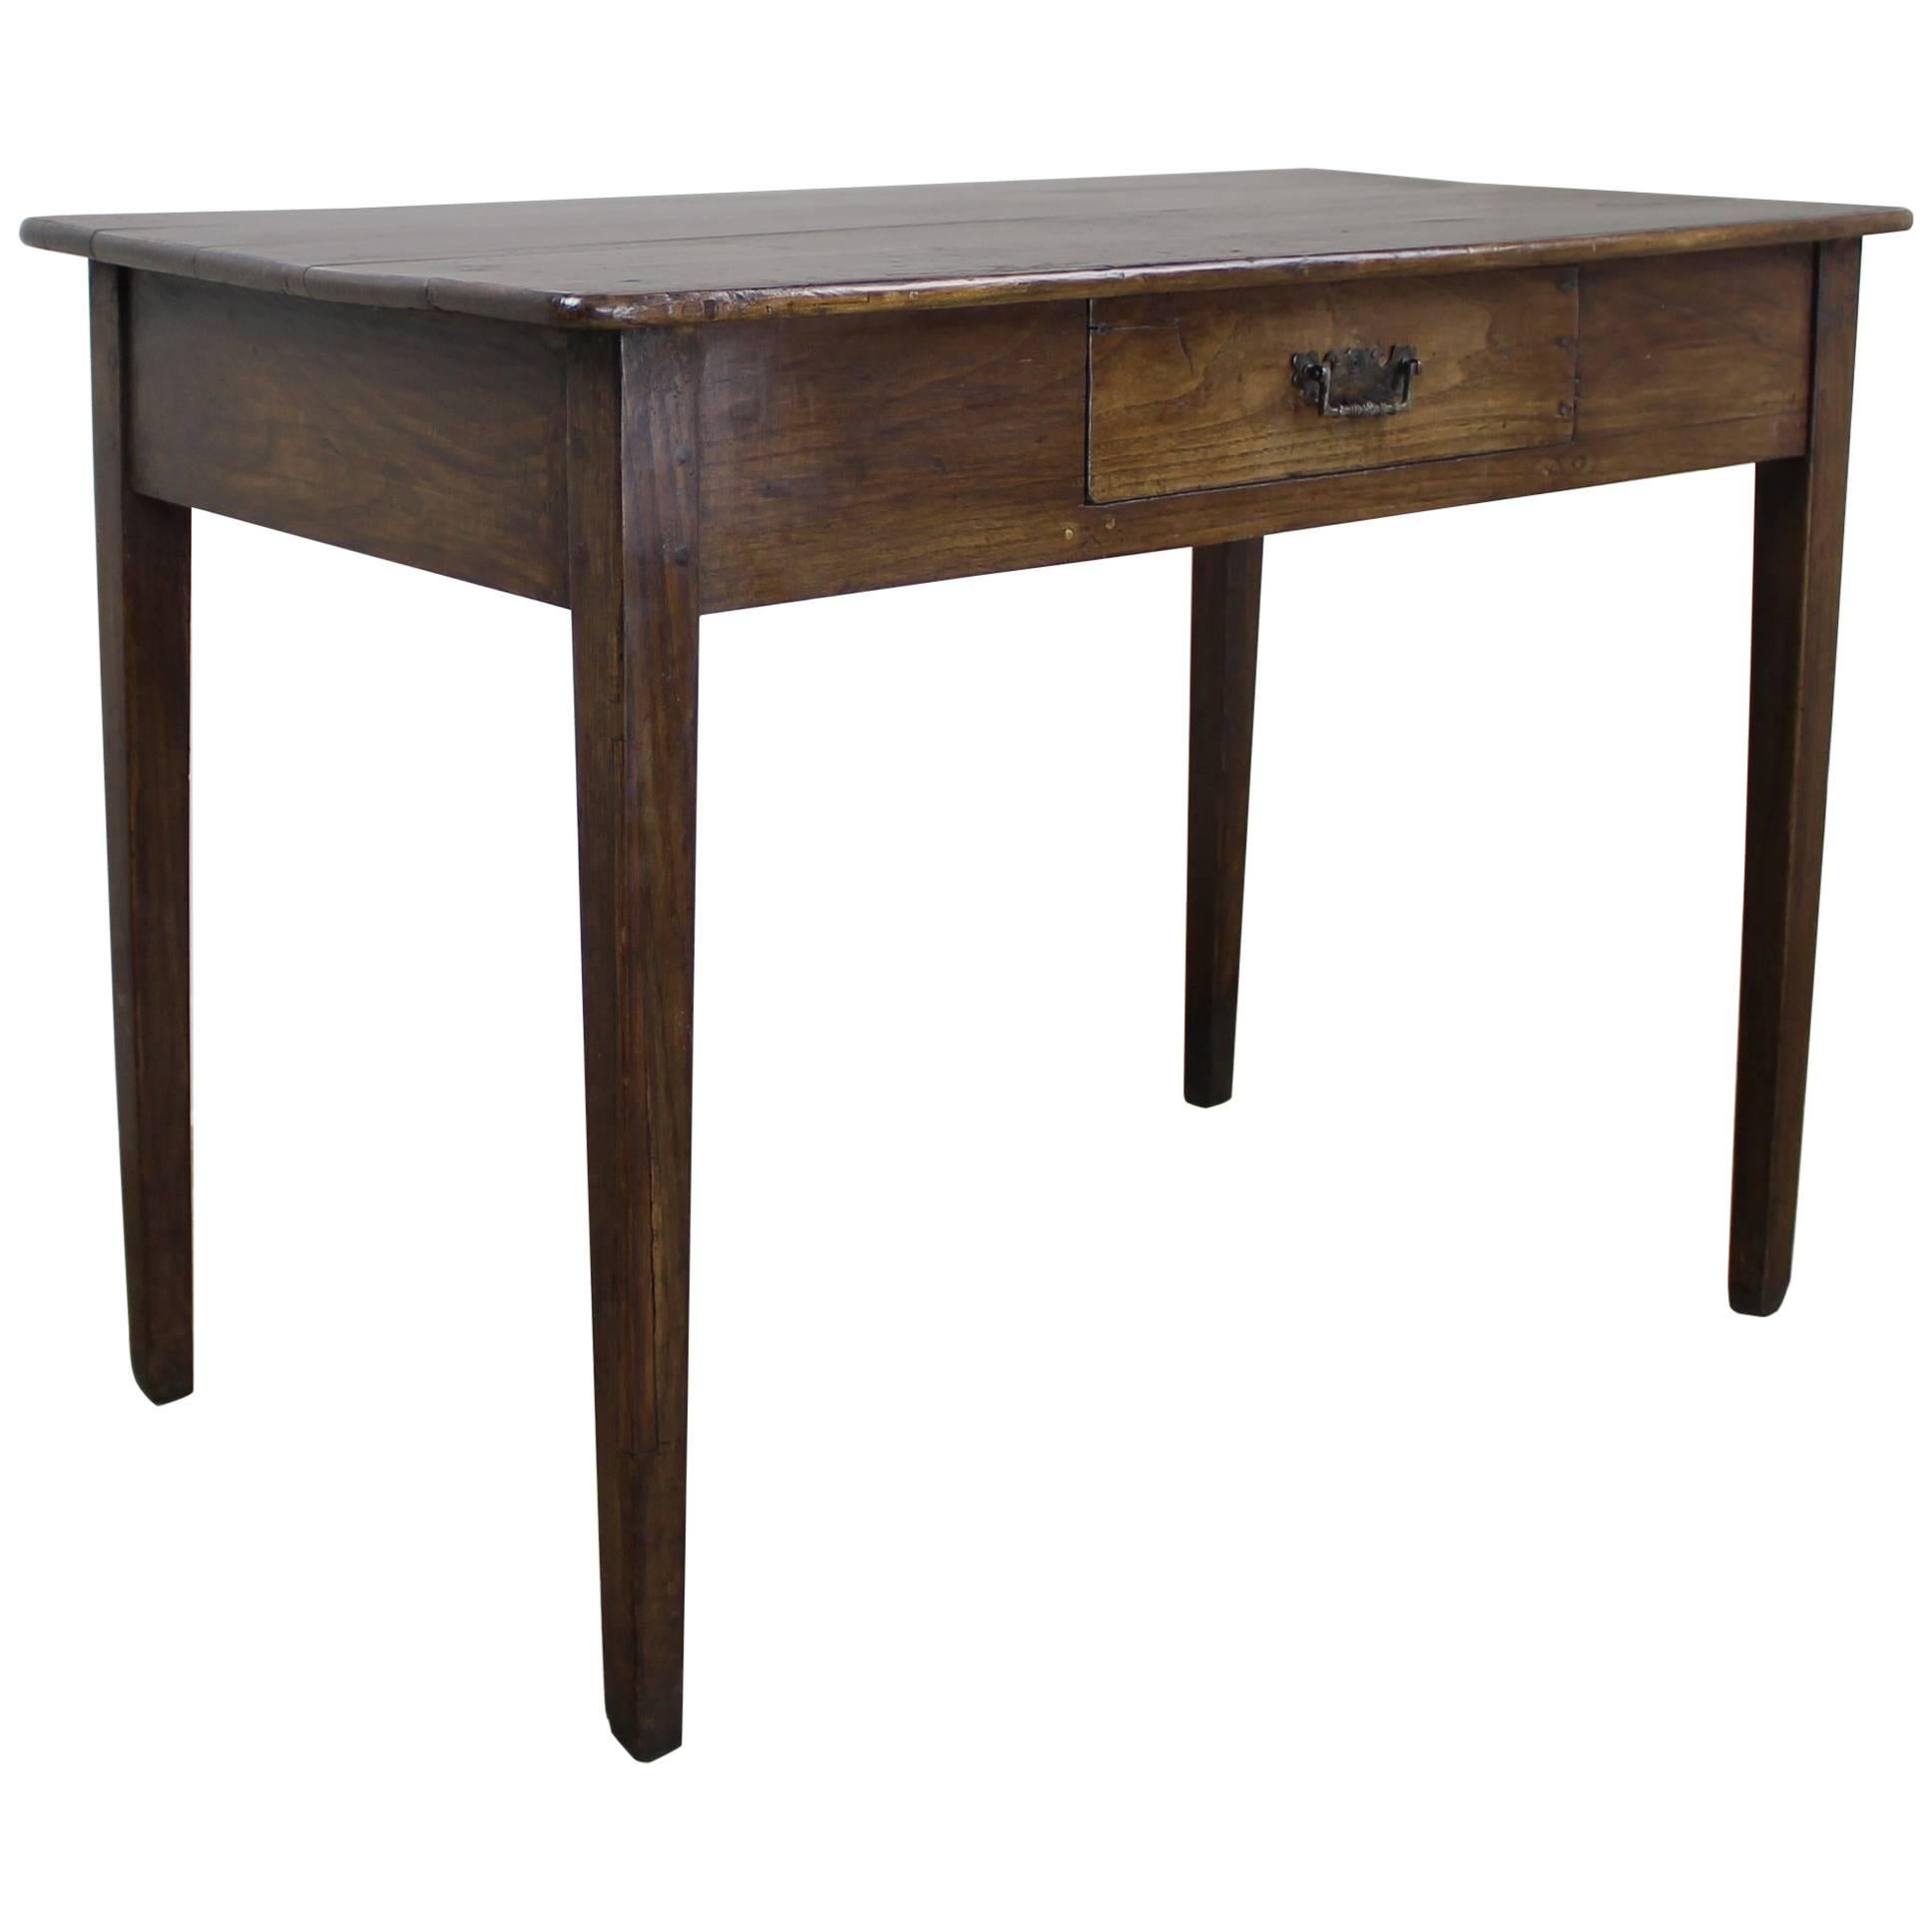 Antique Oak Writing Table with Decorative Drawer Pull